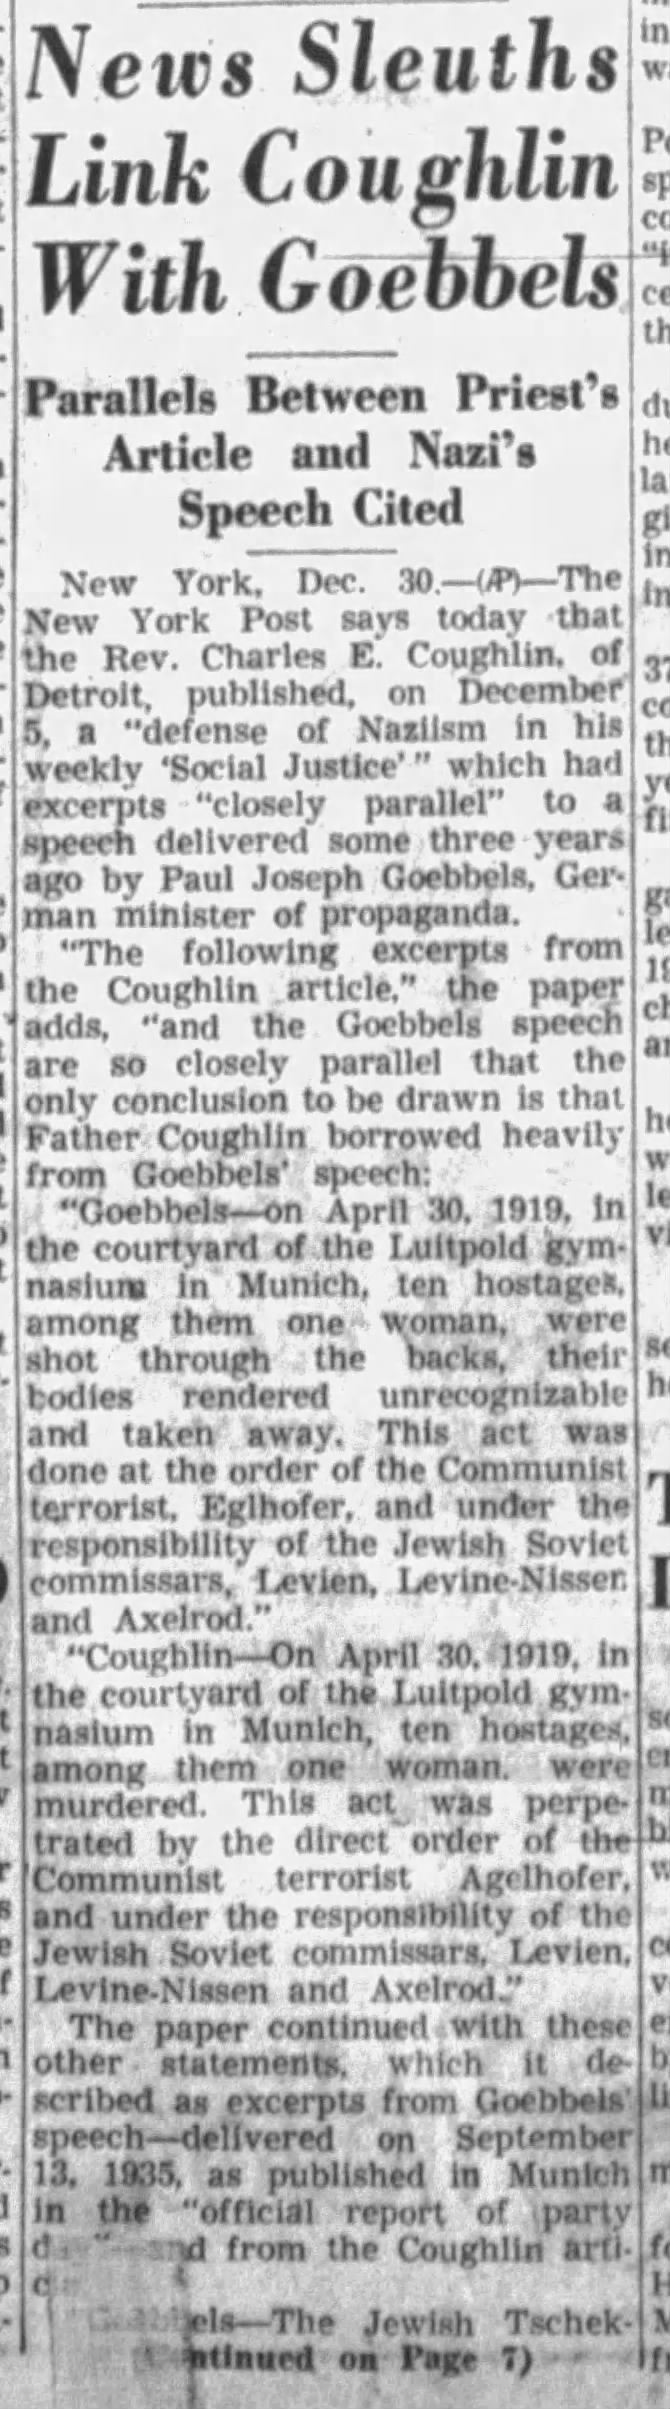 News Sleuths Link Coughlin With Goebbels